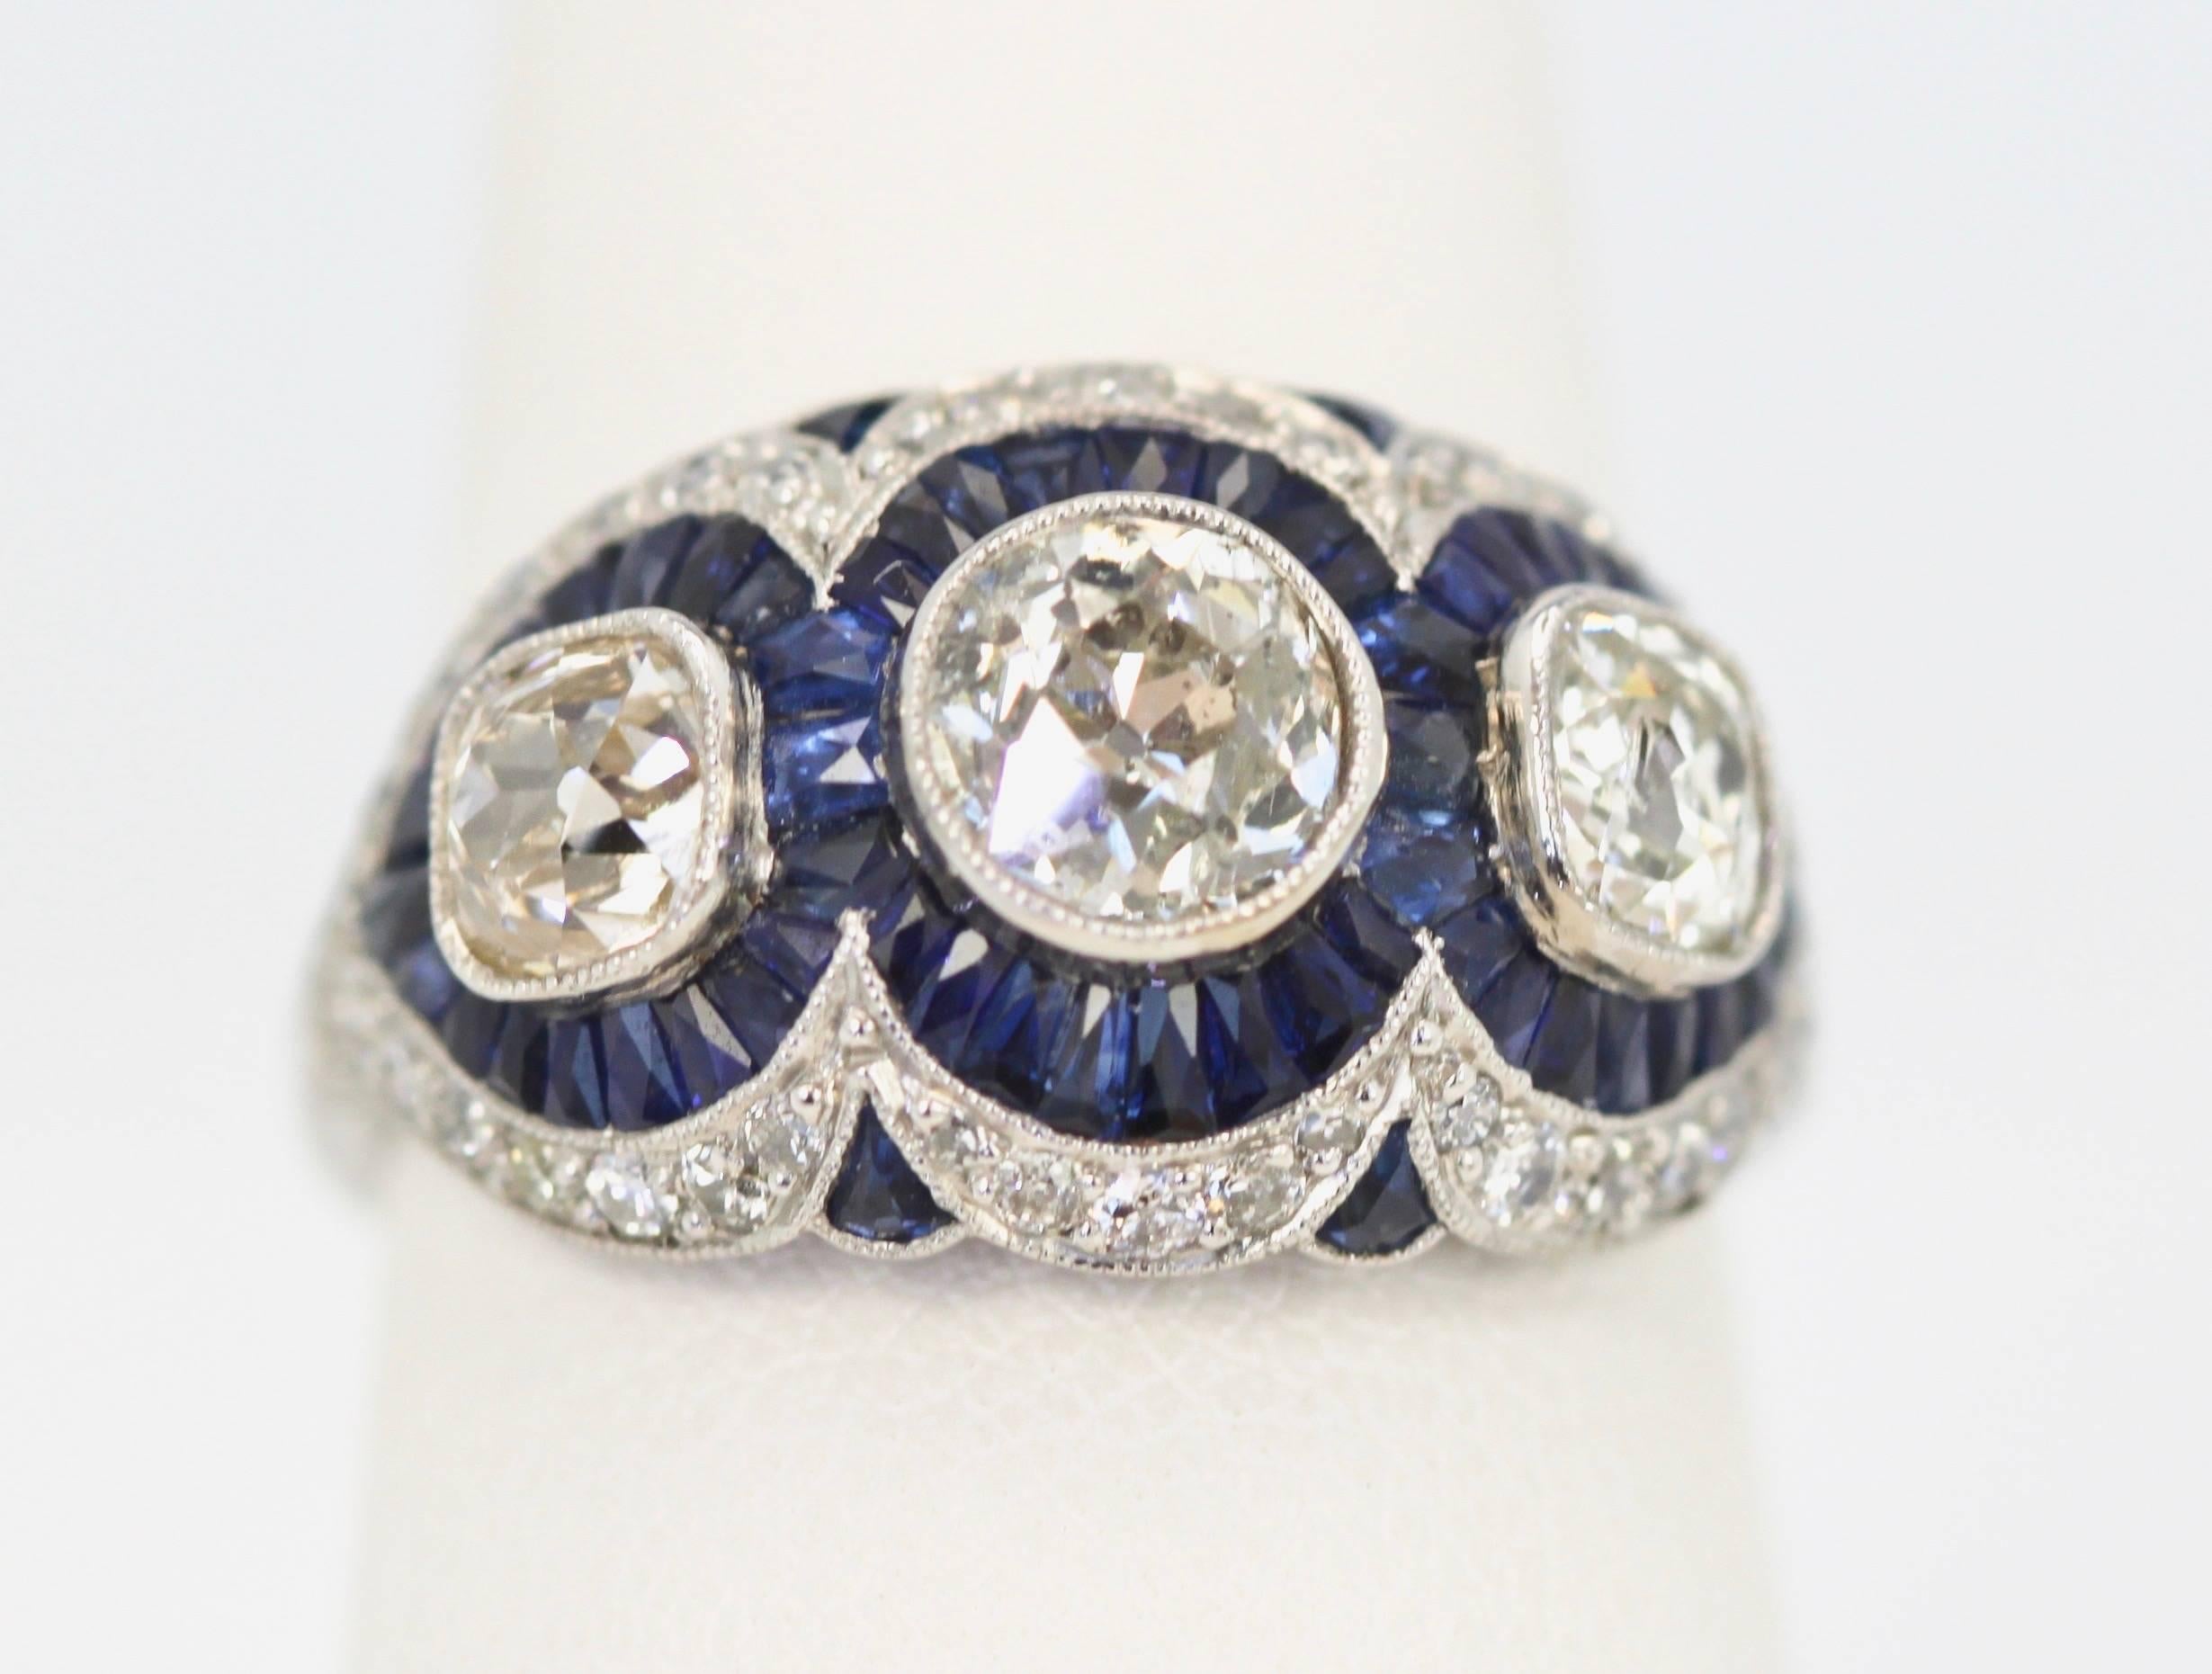 This Diamond Sapphire ring is gorgeous and as you can see from the photo's even through the scallops it has sapphires. This is the real deal! This ring is set with one (1) center old miner cut round Diamond and two (2) side cushion cut old miner